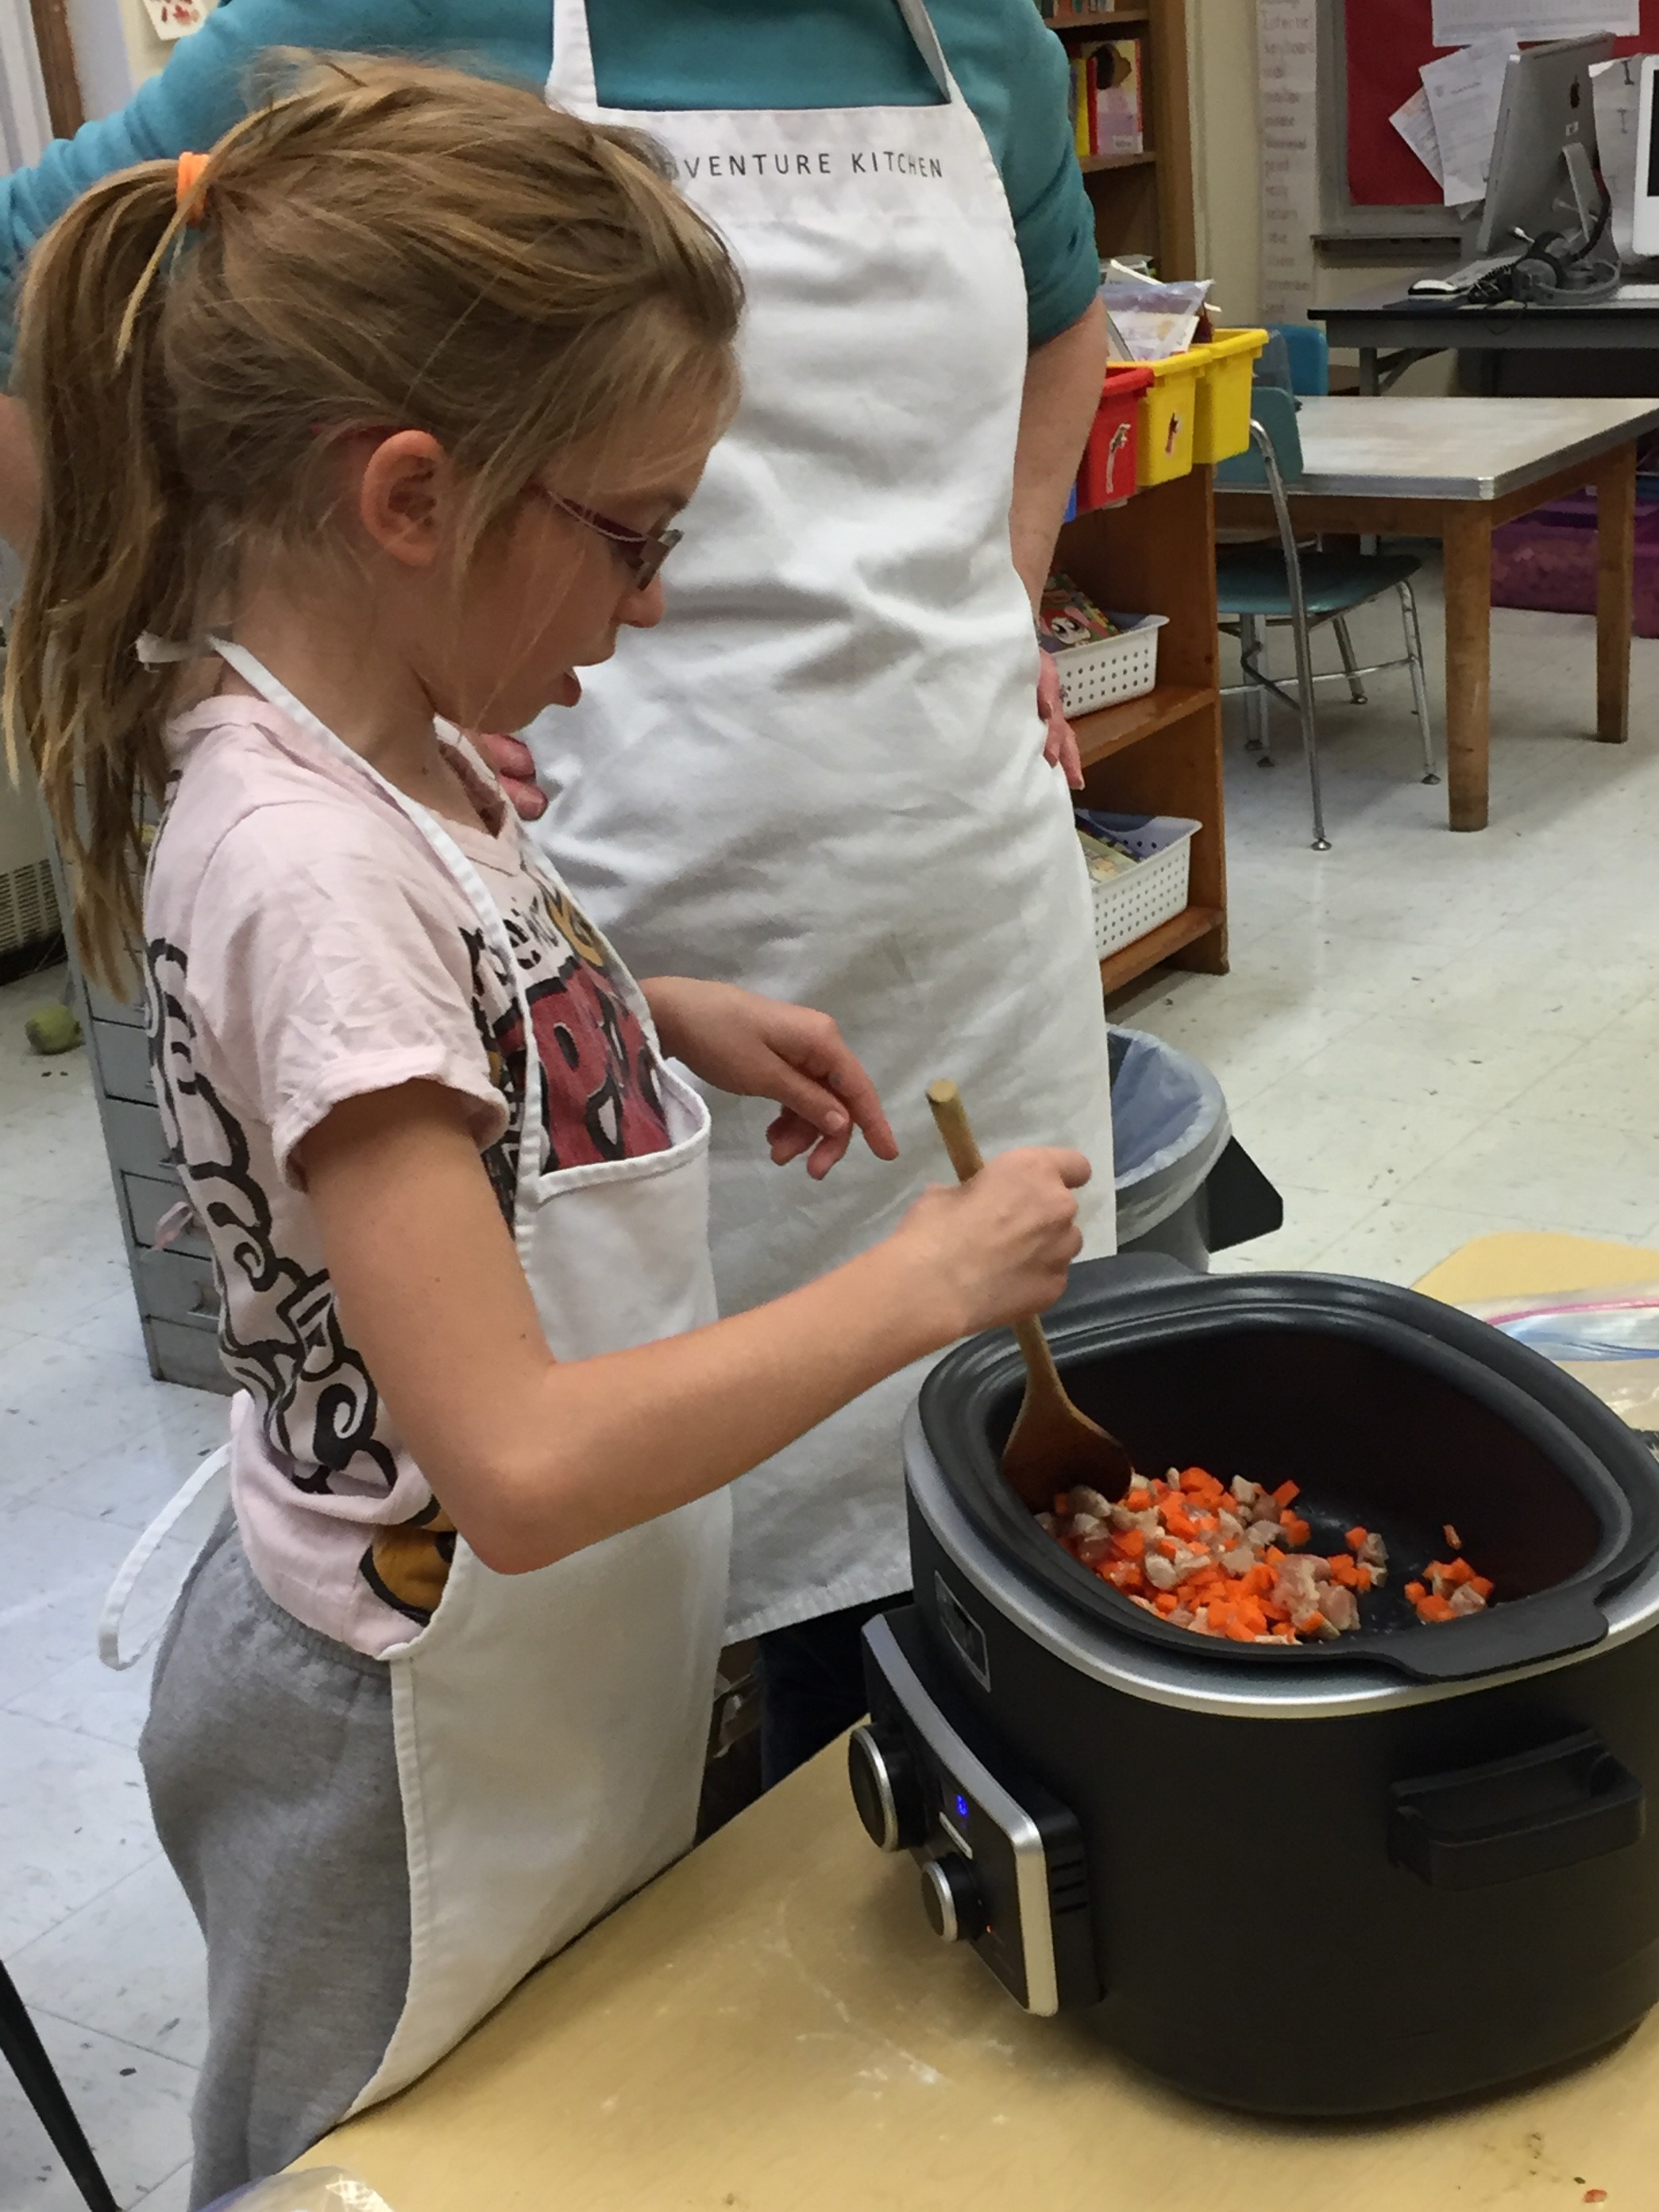 Stirring In the Carrots